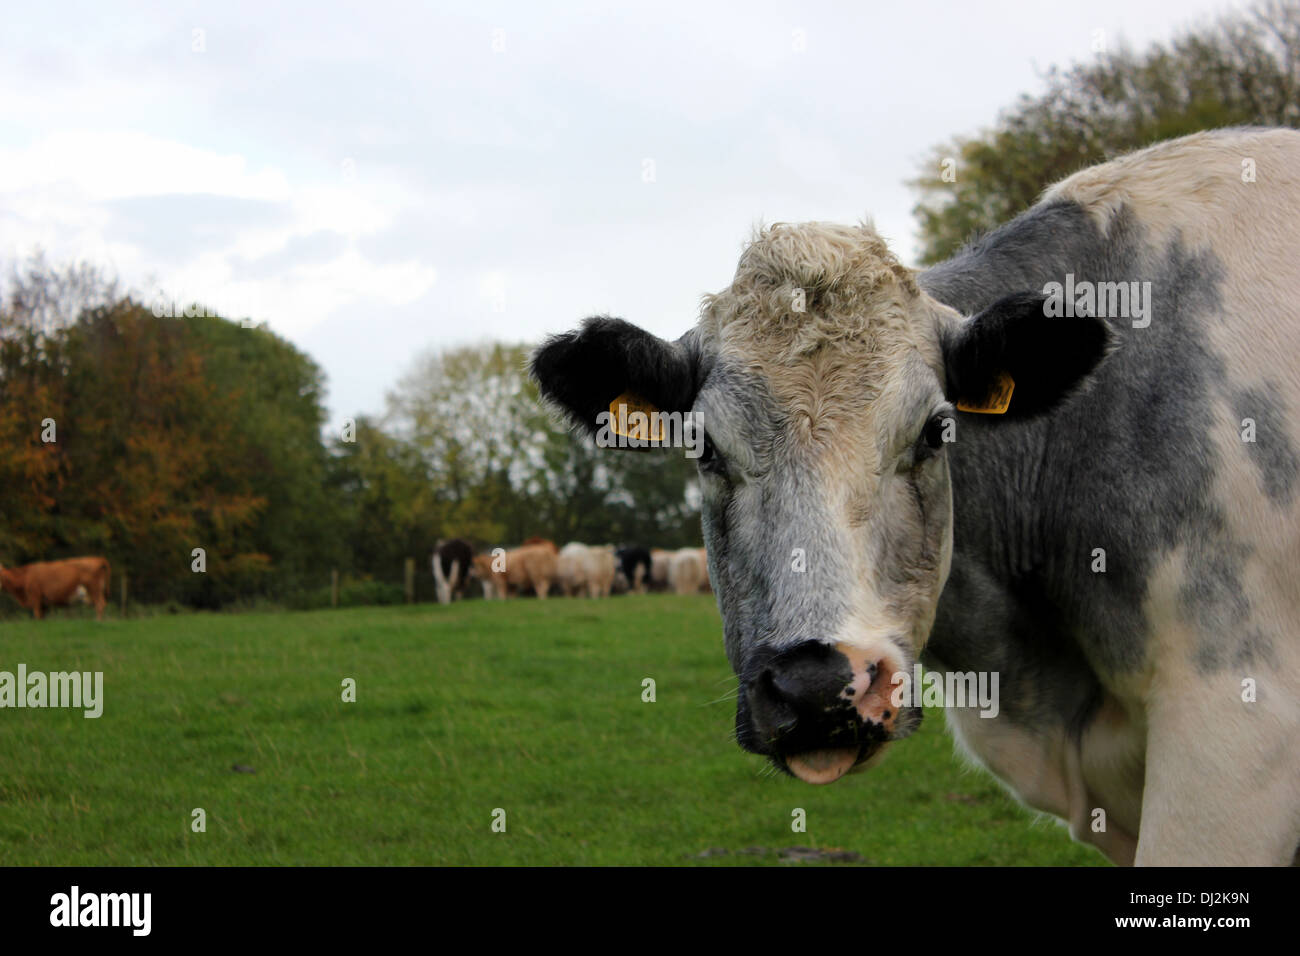 Dairy cow stops grazing to stare at the camera, revealing its ear tags which are used for identification purposes. Stock Photo